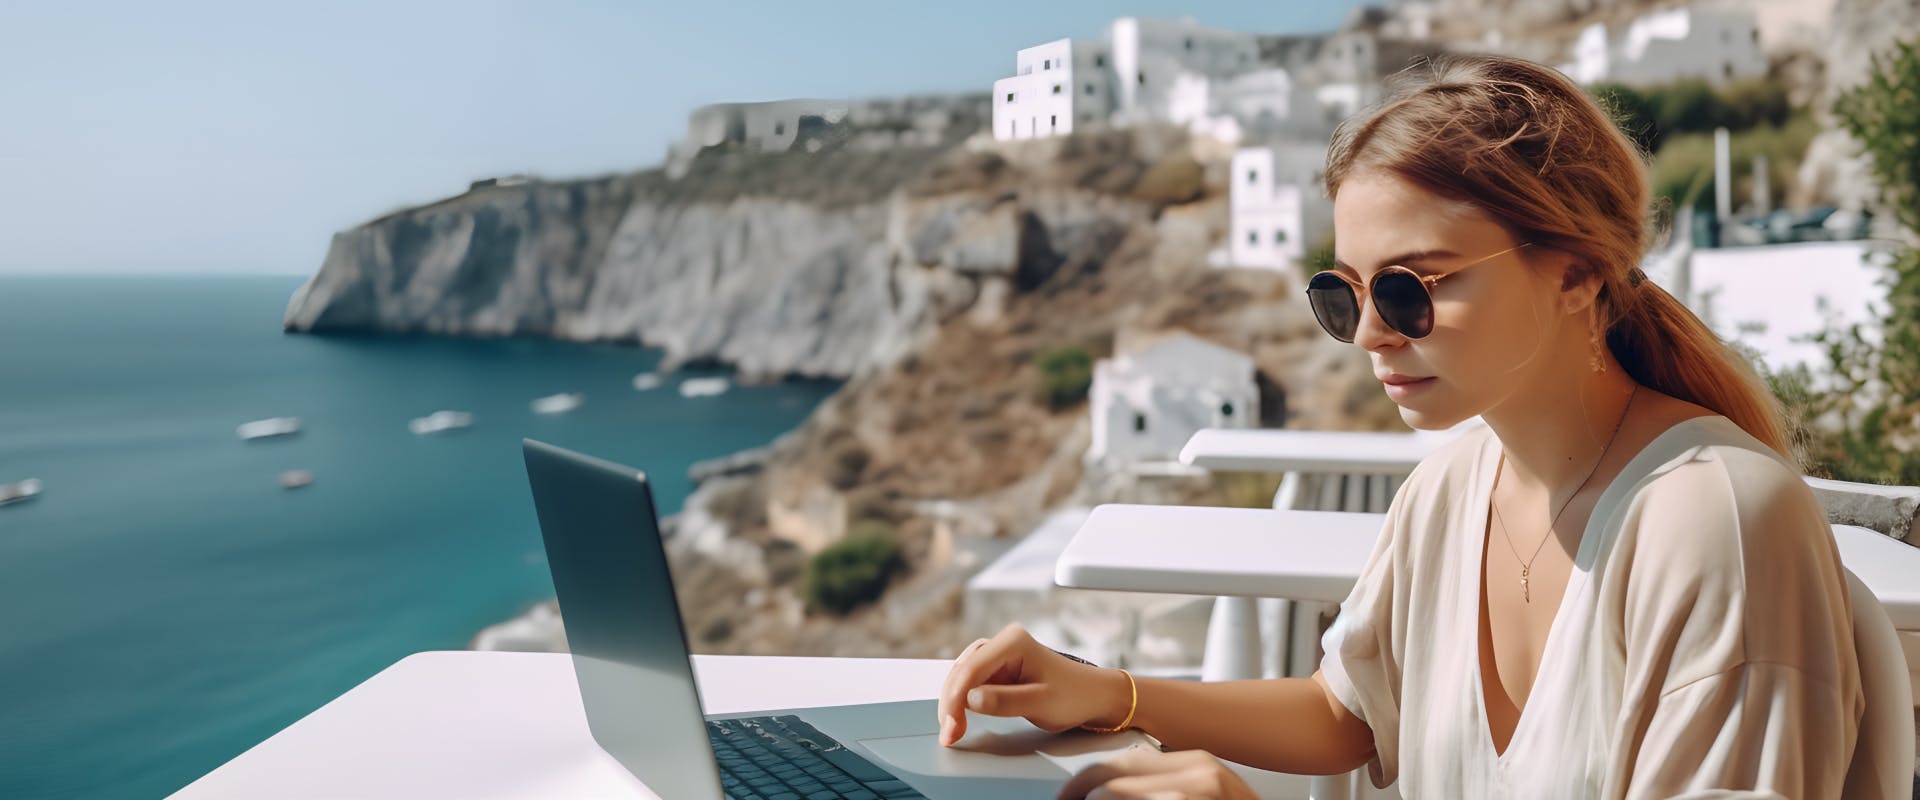 solo female traveler working on a laptop overlooking a cliff view from a Greek island